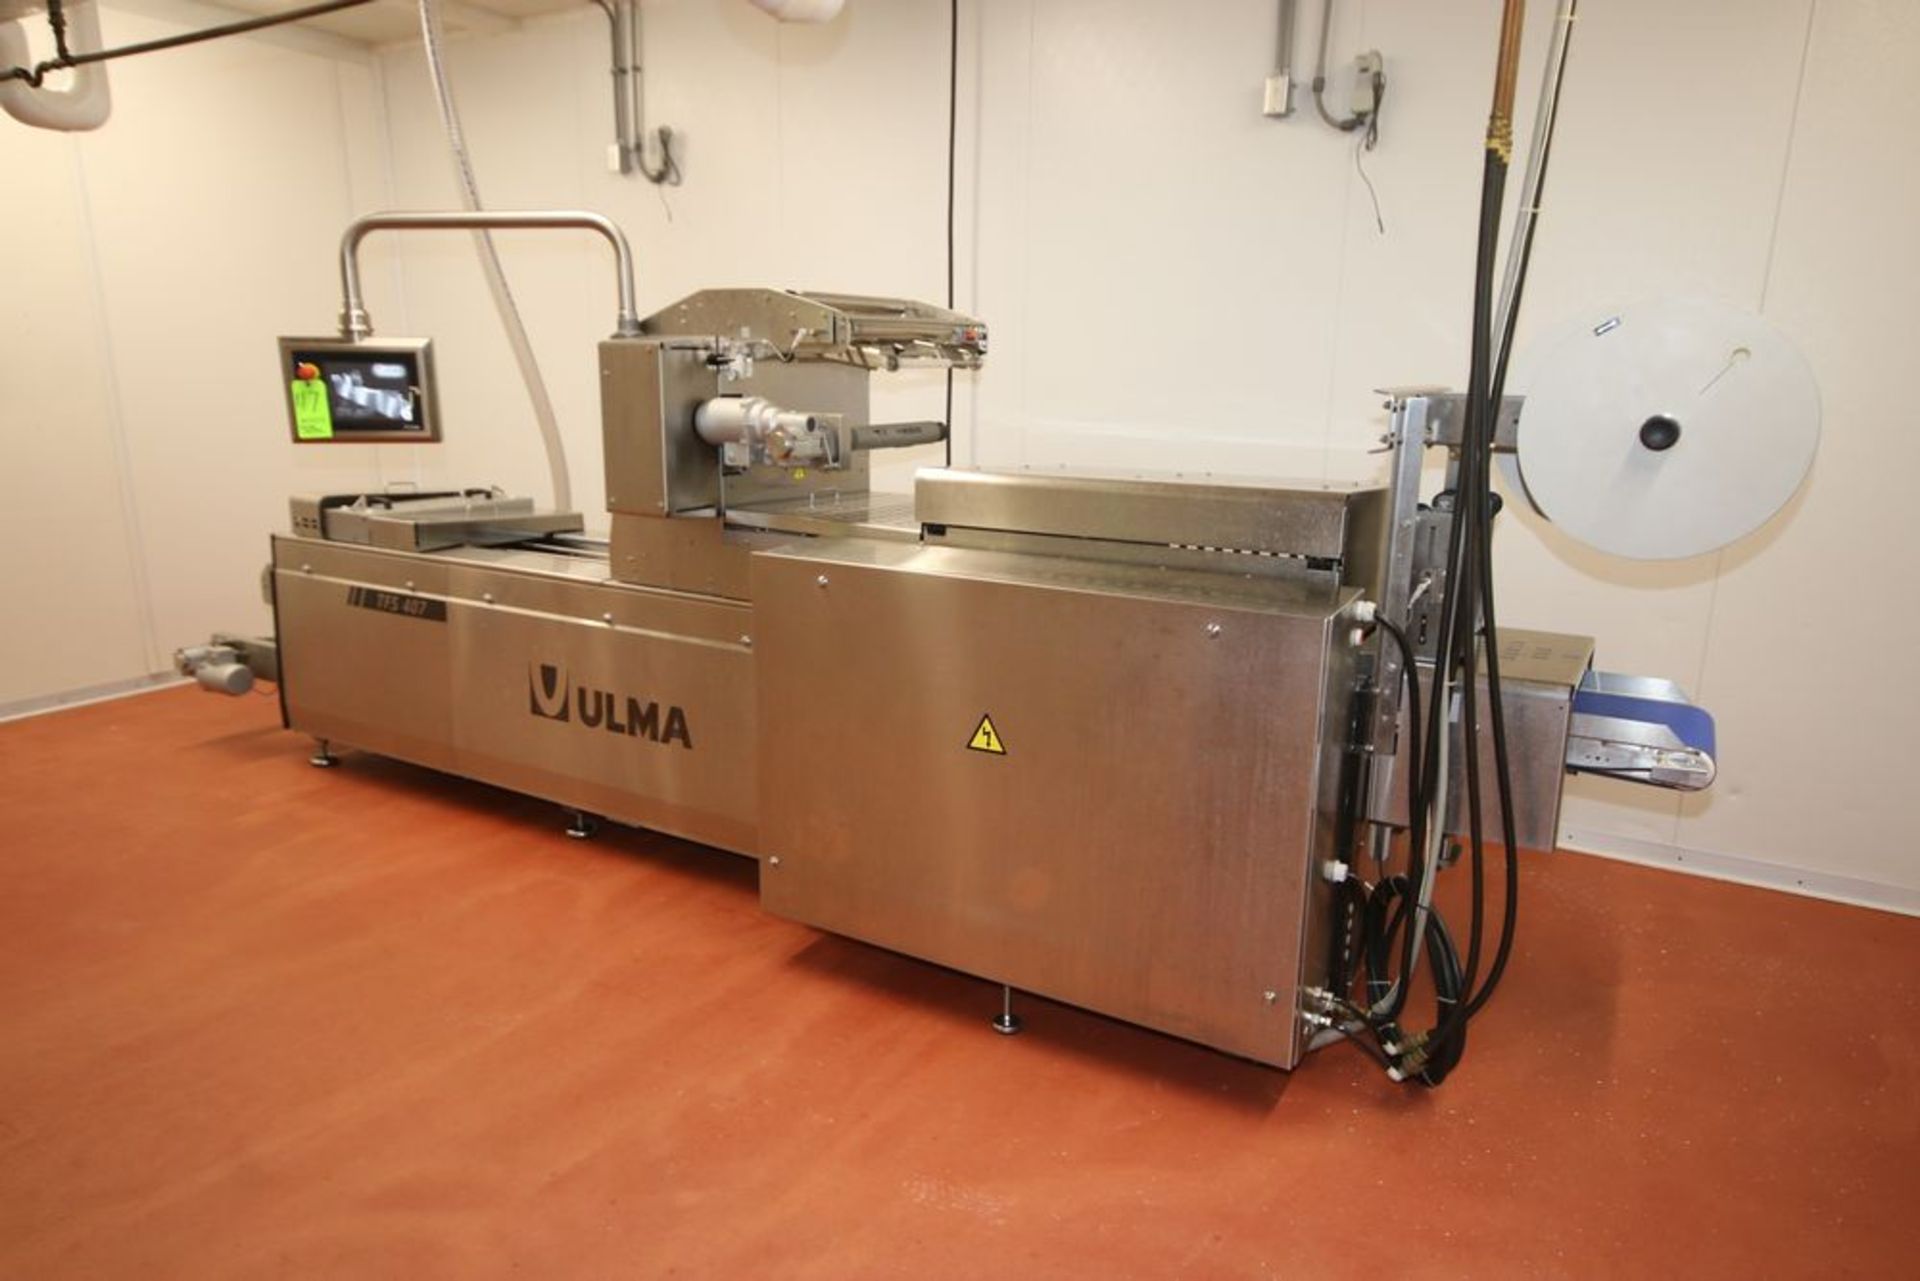 2018 Ulma Vacuum Packaging Machine, M/N TFS 407, S/N 3019981, 220 Volts, 3 Phase, with Touchscreen - Image 3 of 21